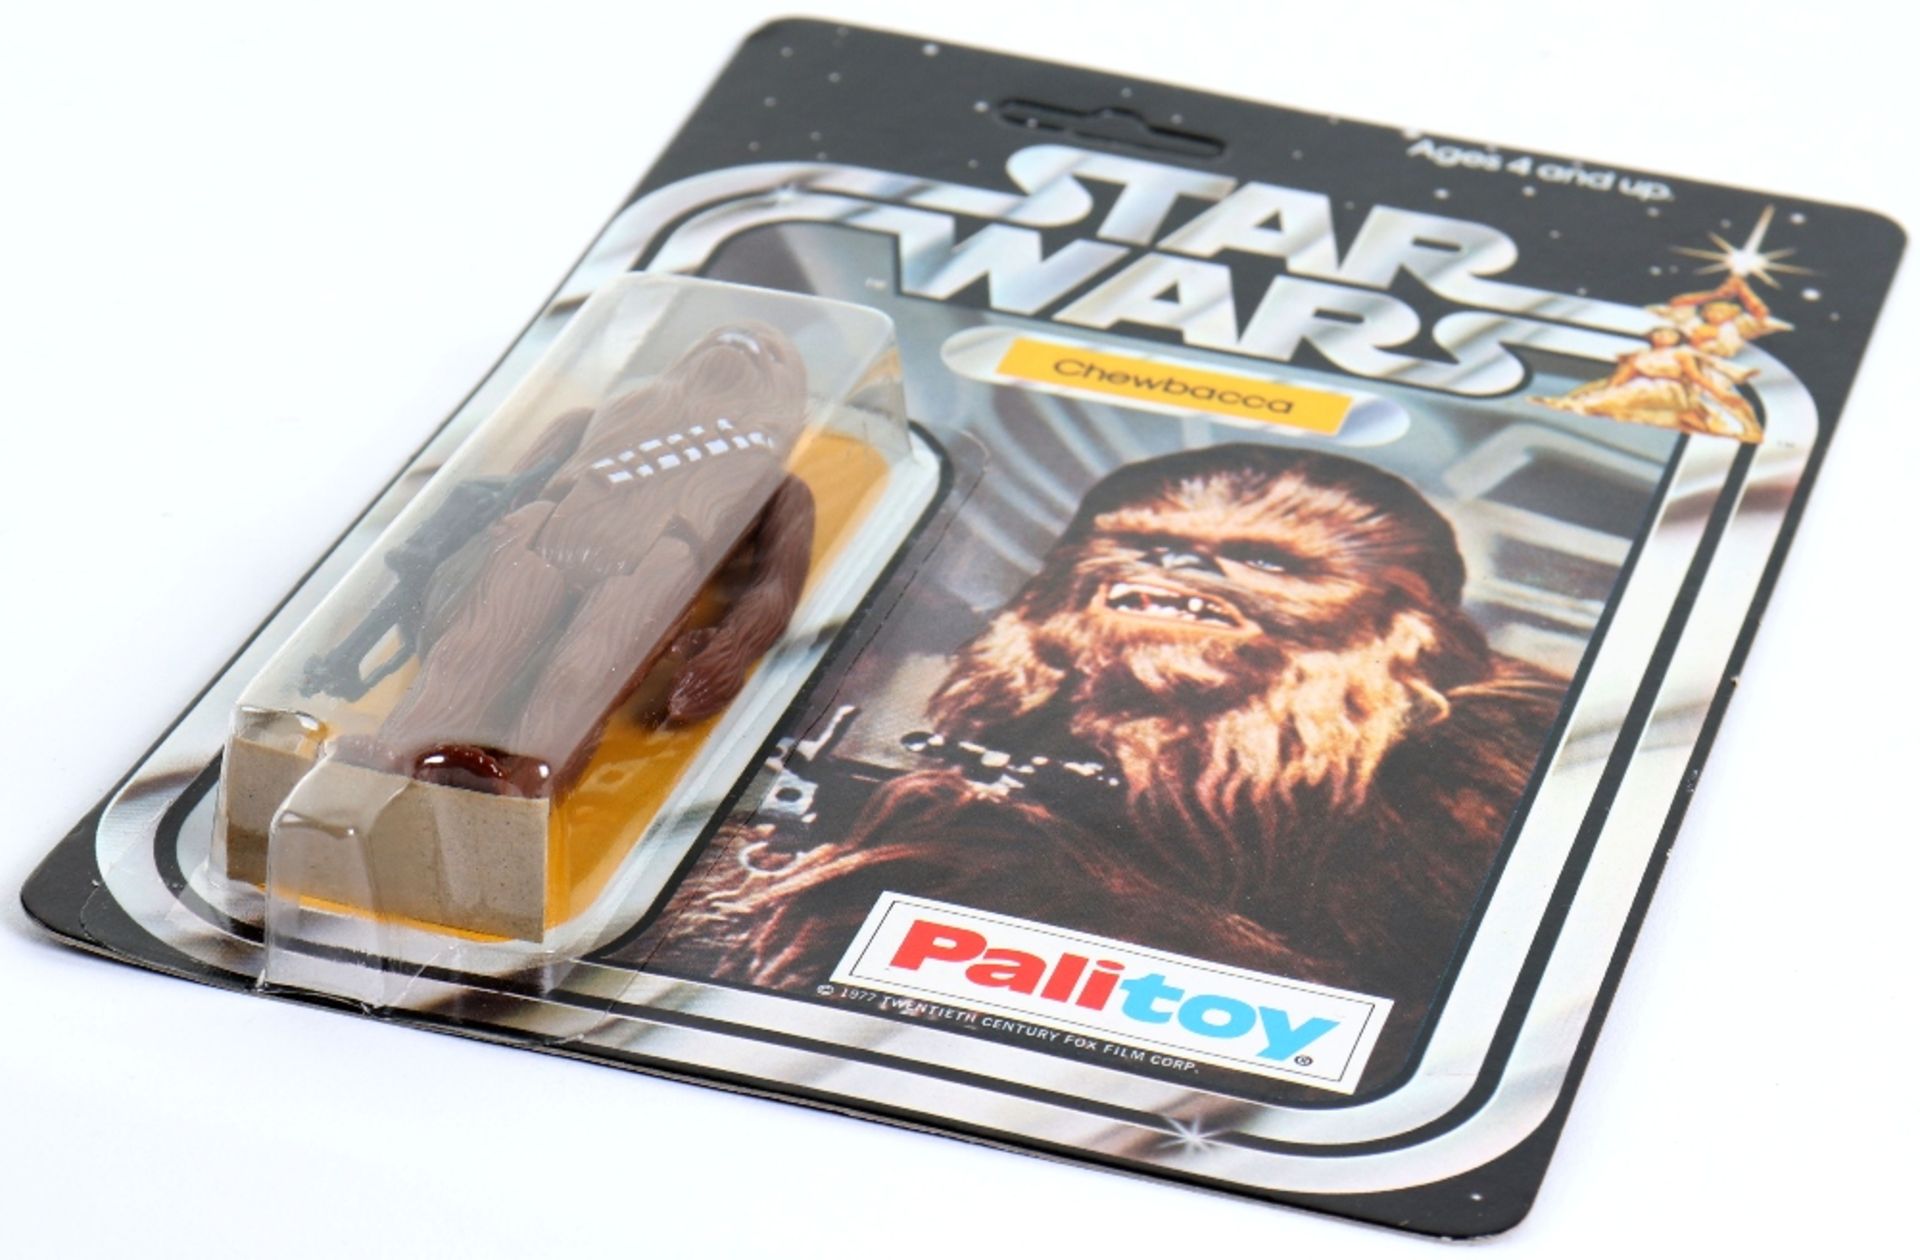 Palitoy Star Wars Chewbacca Vintage Original Carded Figure, - Image 5 of 6